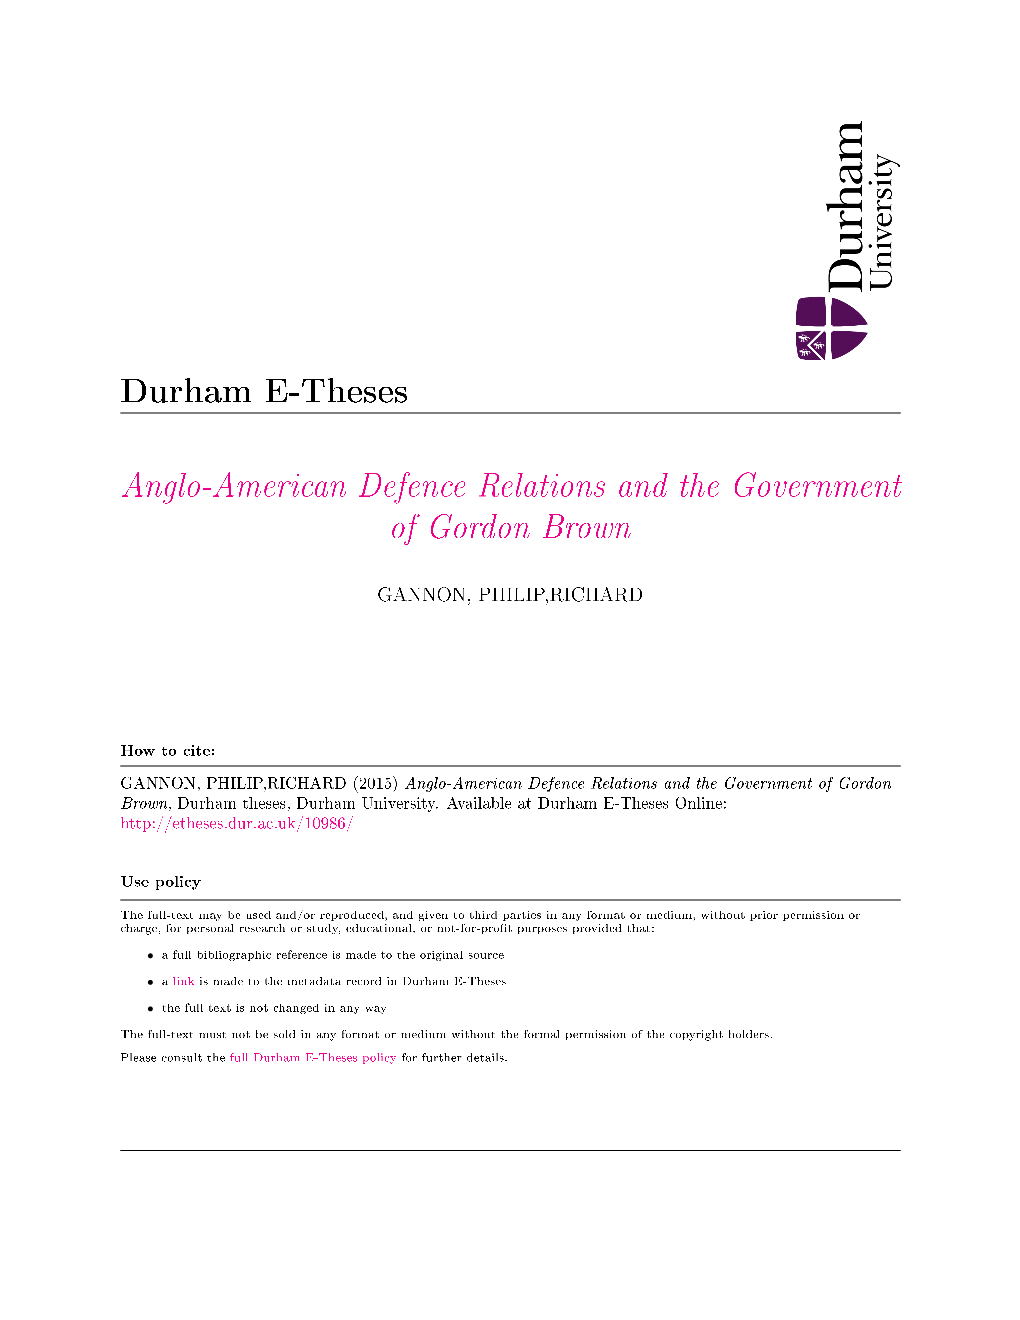 Anglo-American Defence Relations & the Government of Gordon Brown